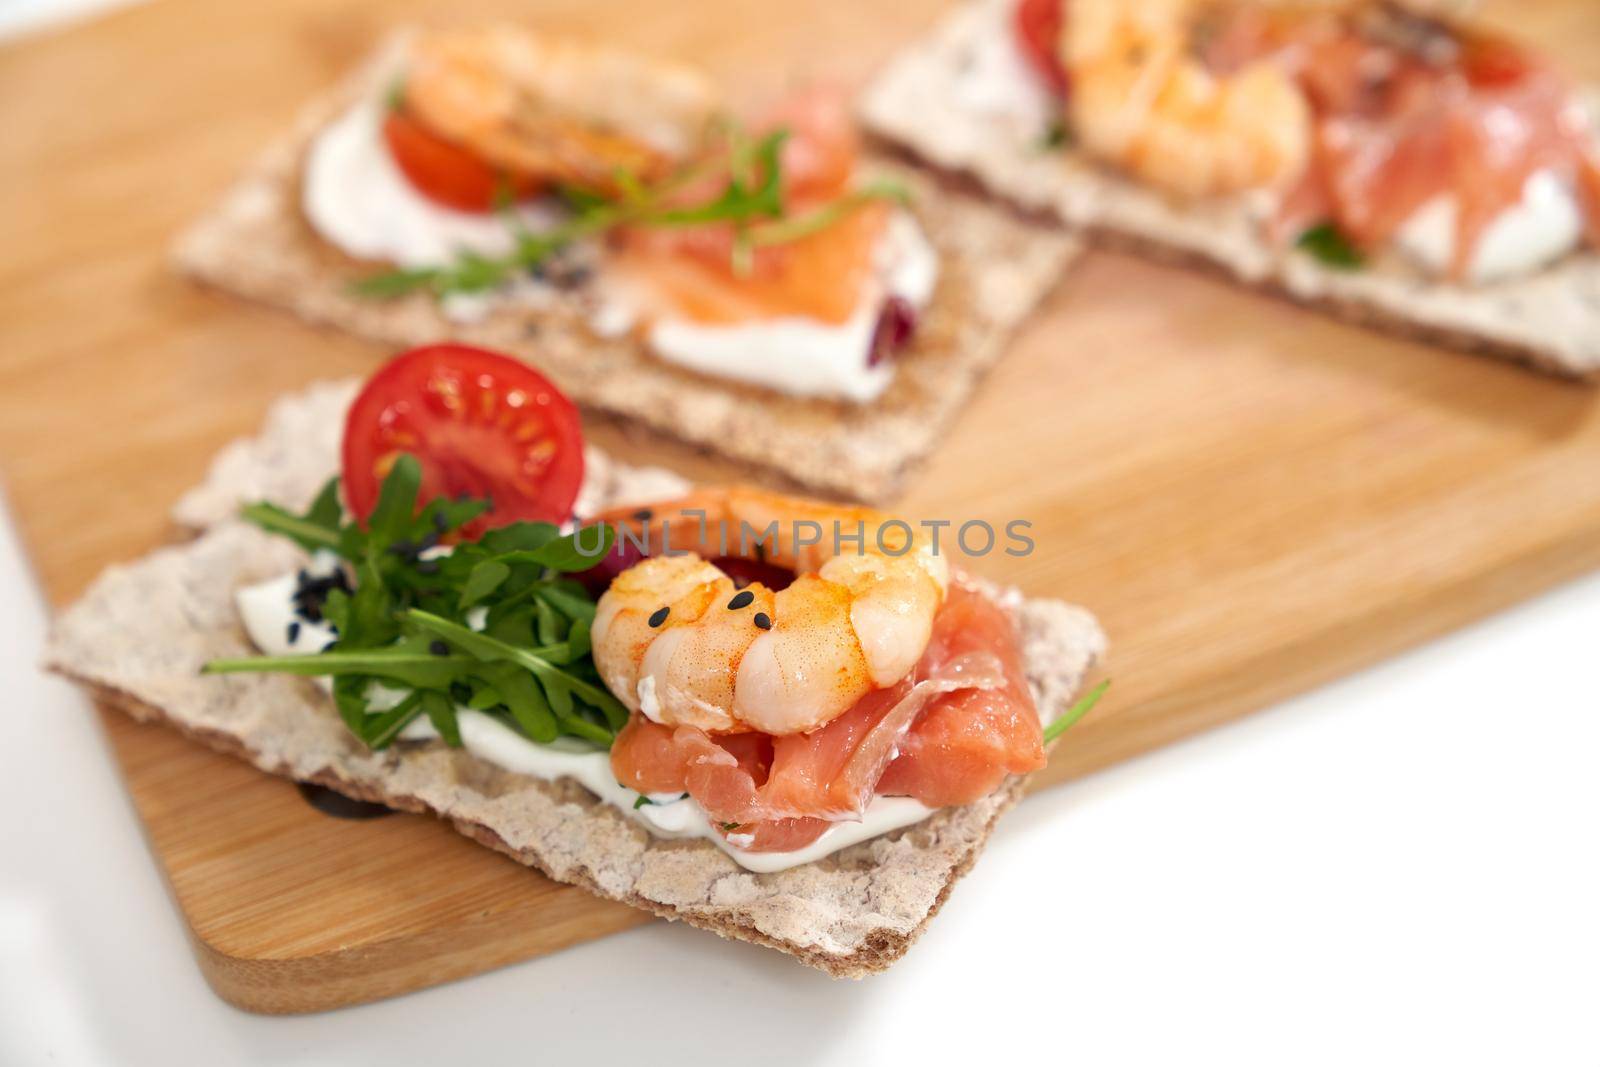  Sandwich of diet breads with shrimp, salmon and tomatoes.  by SerhiiBobyk